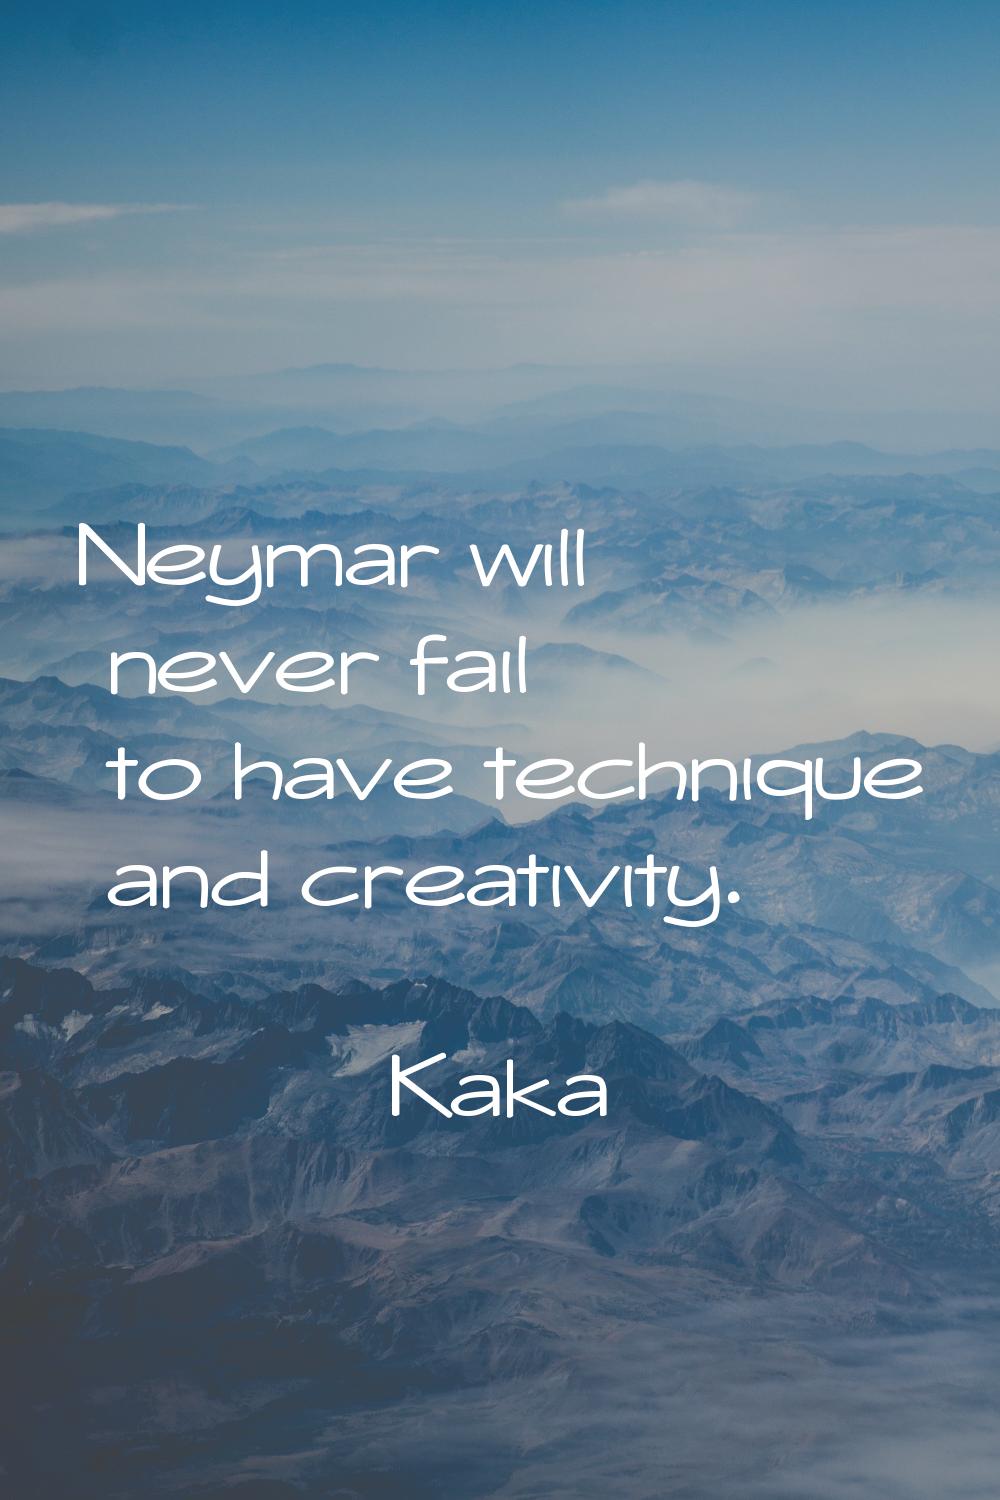 Neymar will never fail to have technique and creativity.